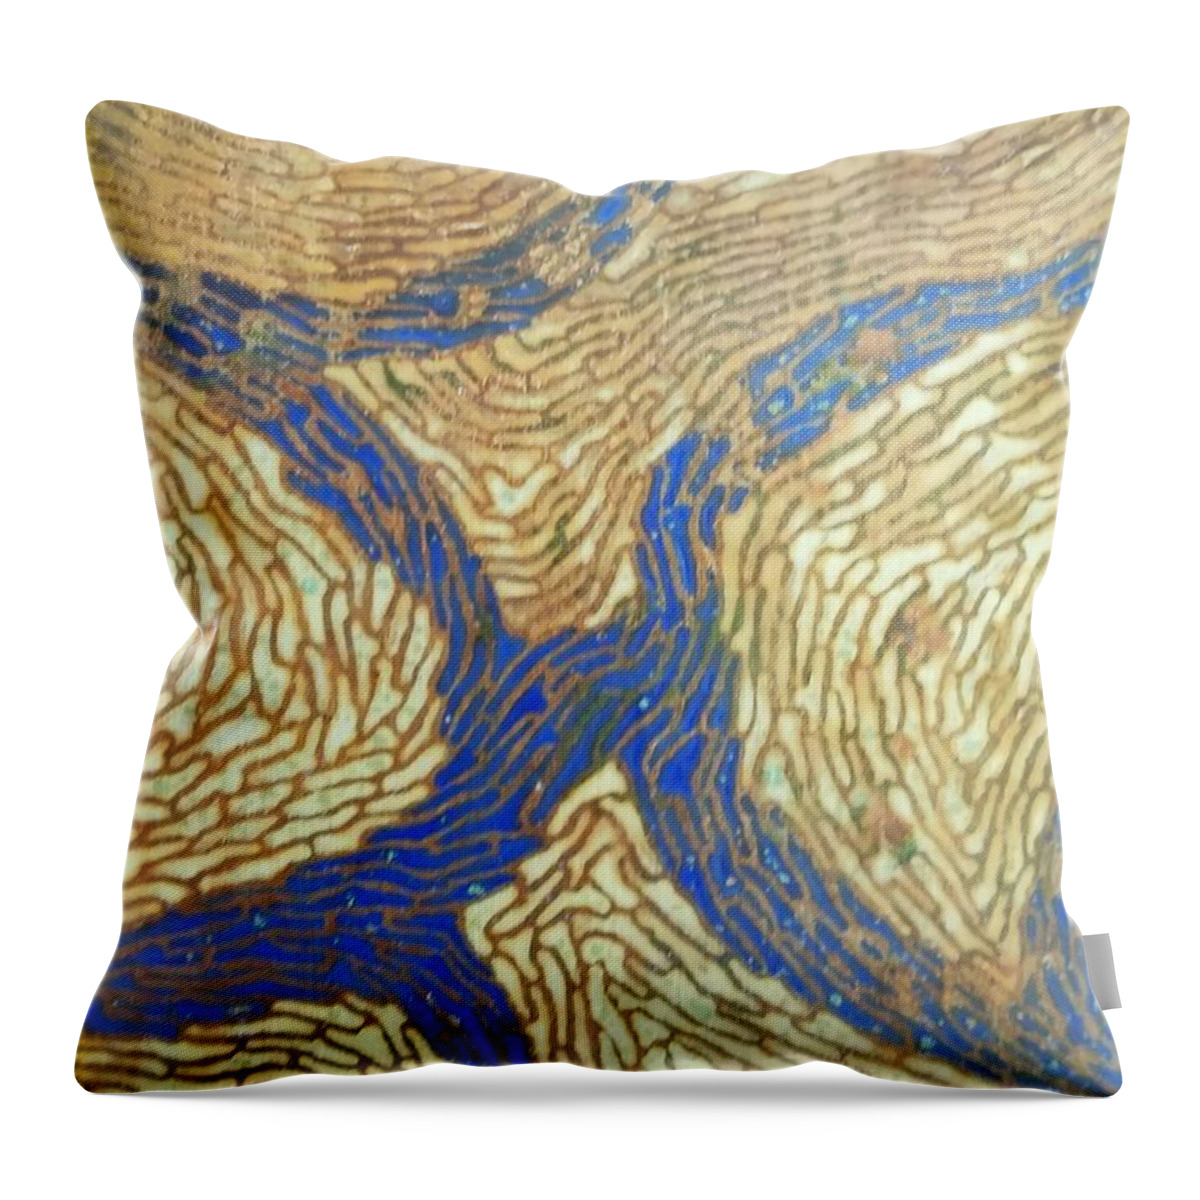 Petals Throw Pillow featuring the painting Petals by DLWhitson